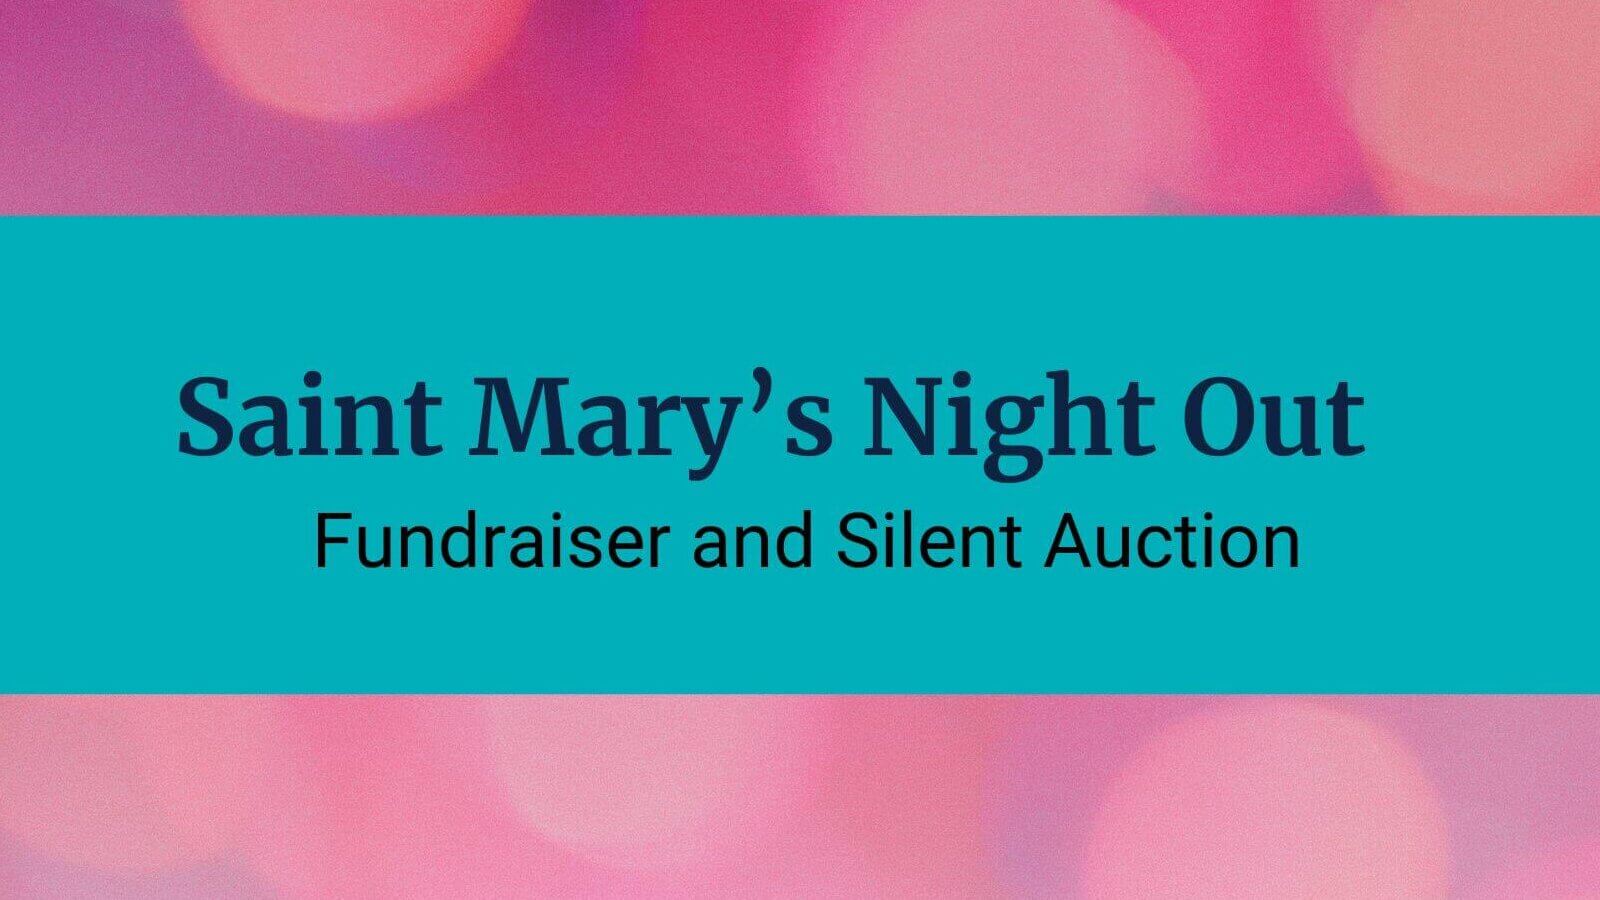 Words on a sparkly fuschia background: Saint Mary's Night Out, Fundraiser and Silent Auction